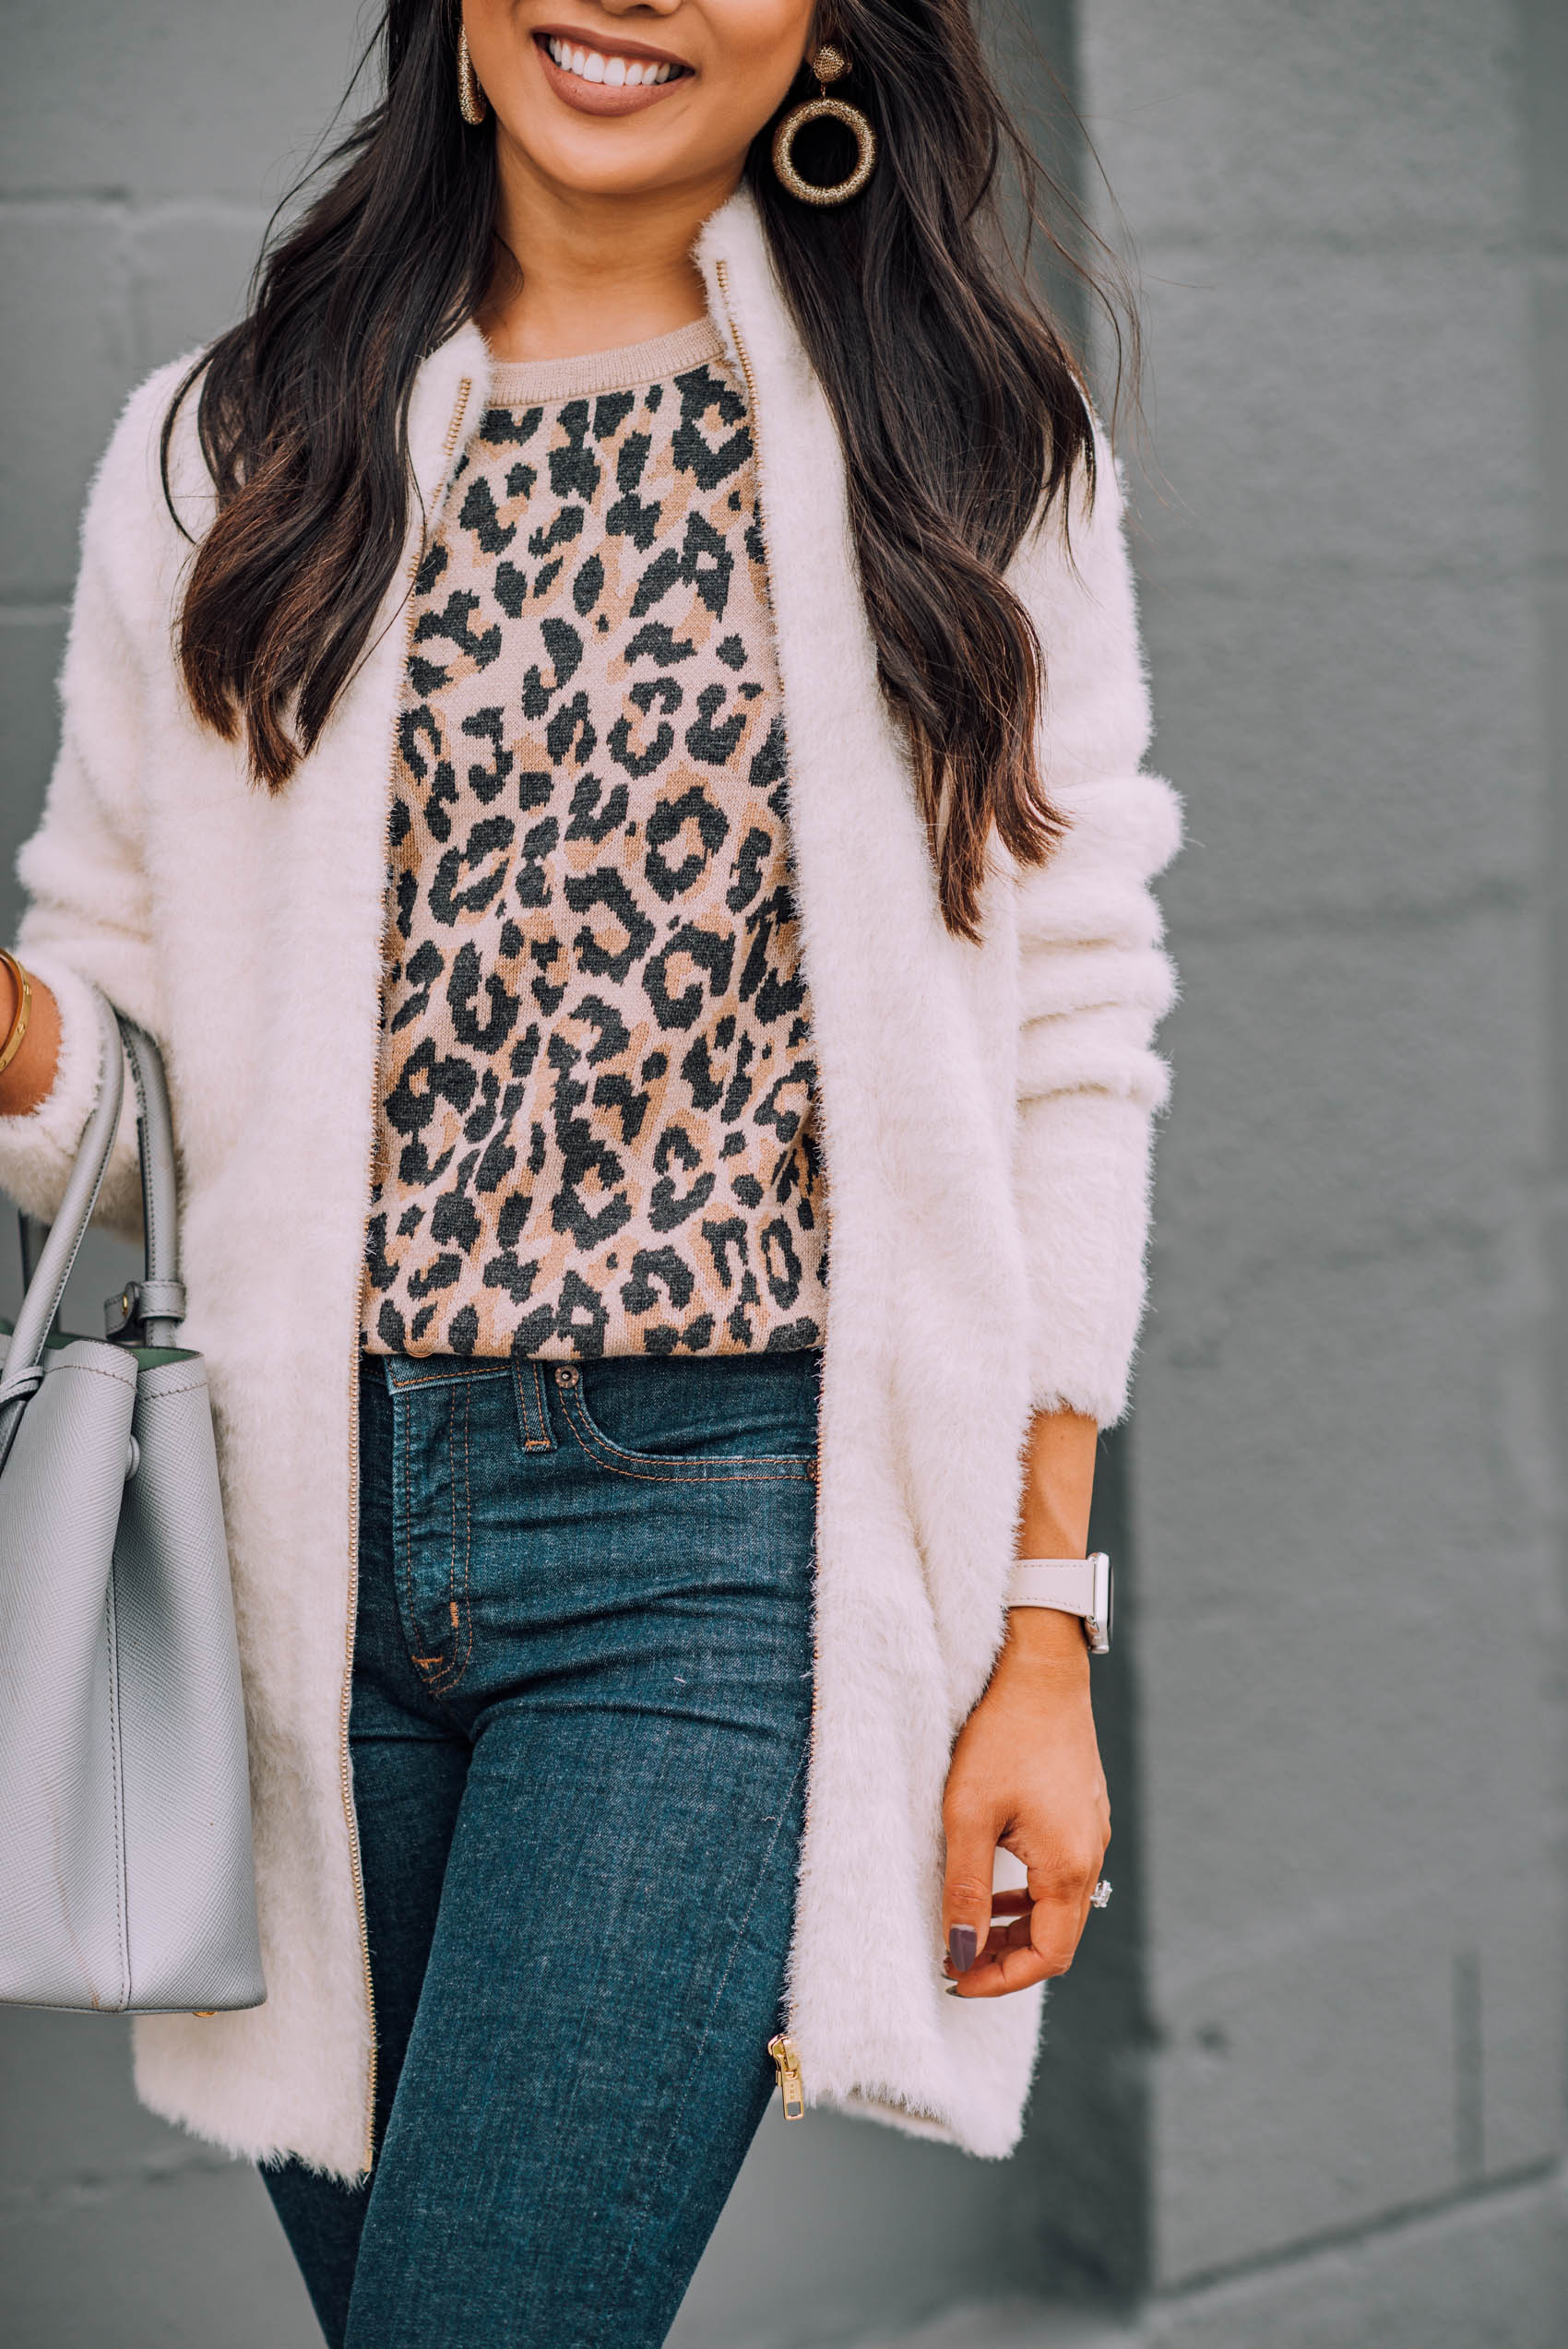 Blogger Hoang-Kim wears a fuzzy cardigan jacket with a leopard print sweatshirt for fall